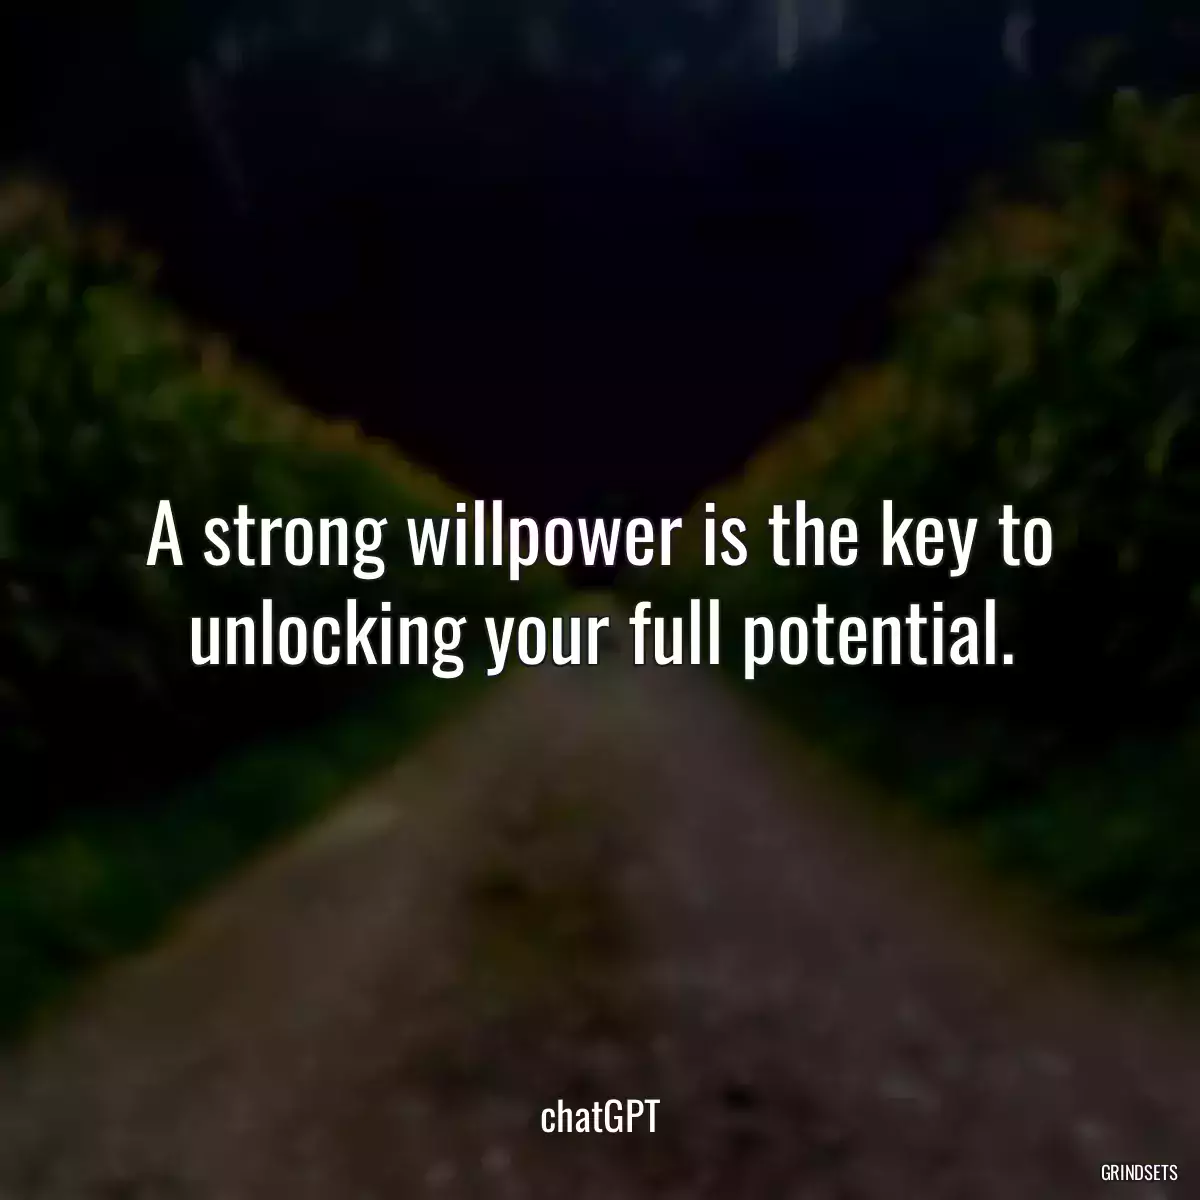 A strong willpower is the key to unlocking your full potential.